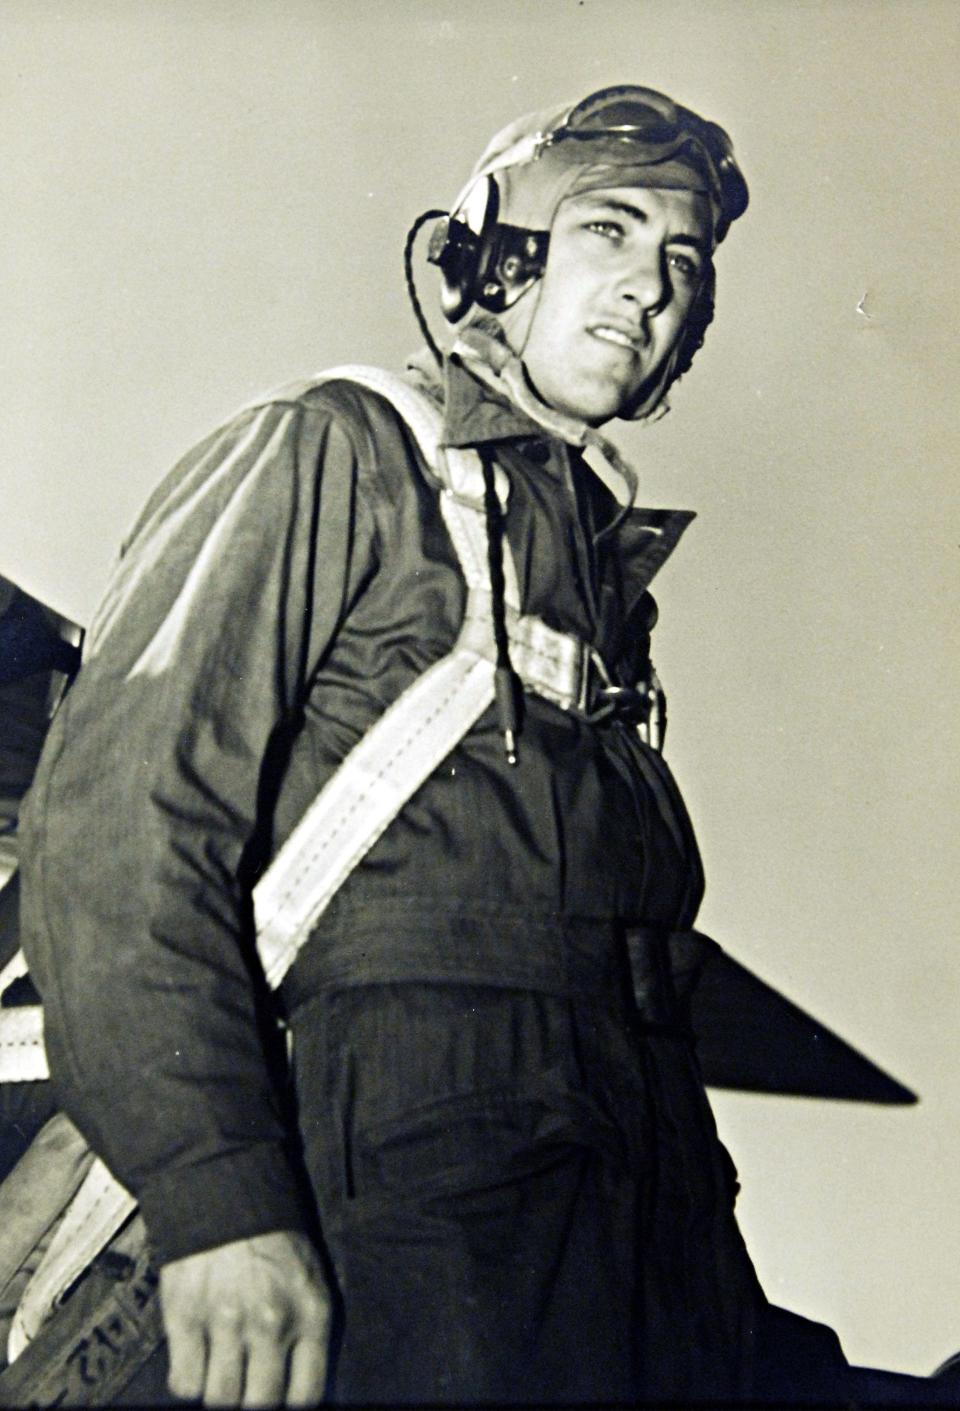 Jack Connell, shown in this undated file photo, was a navigator and bombardier aboard a B-26 Marauder in the Army Air Force's 553rd Squadron, 386th Bombardment Group